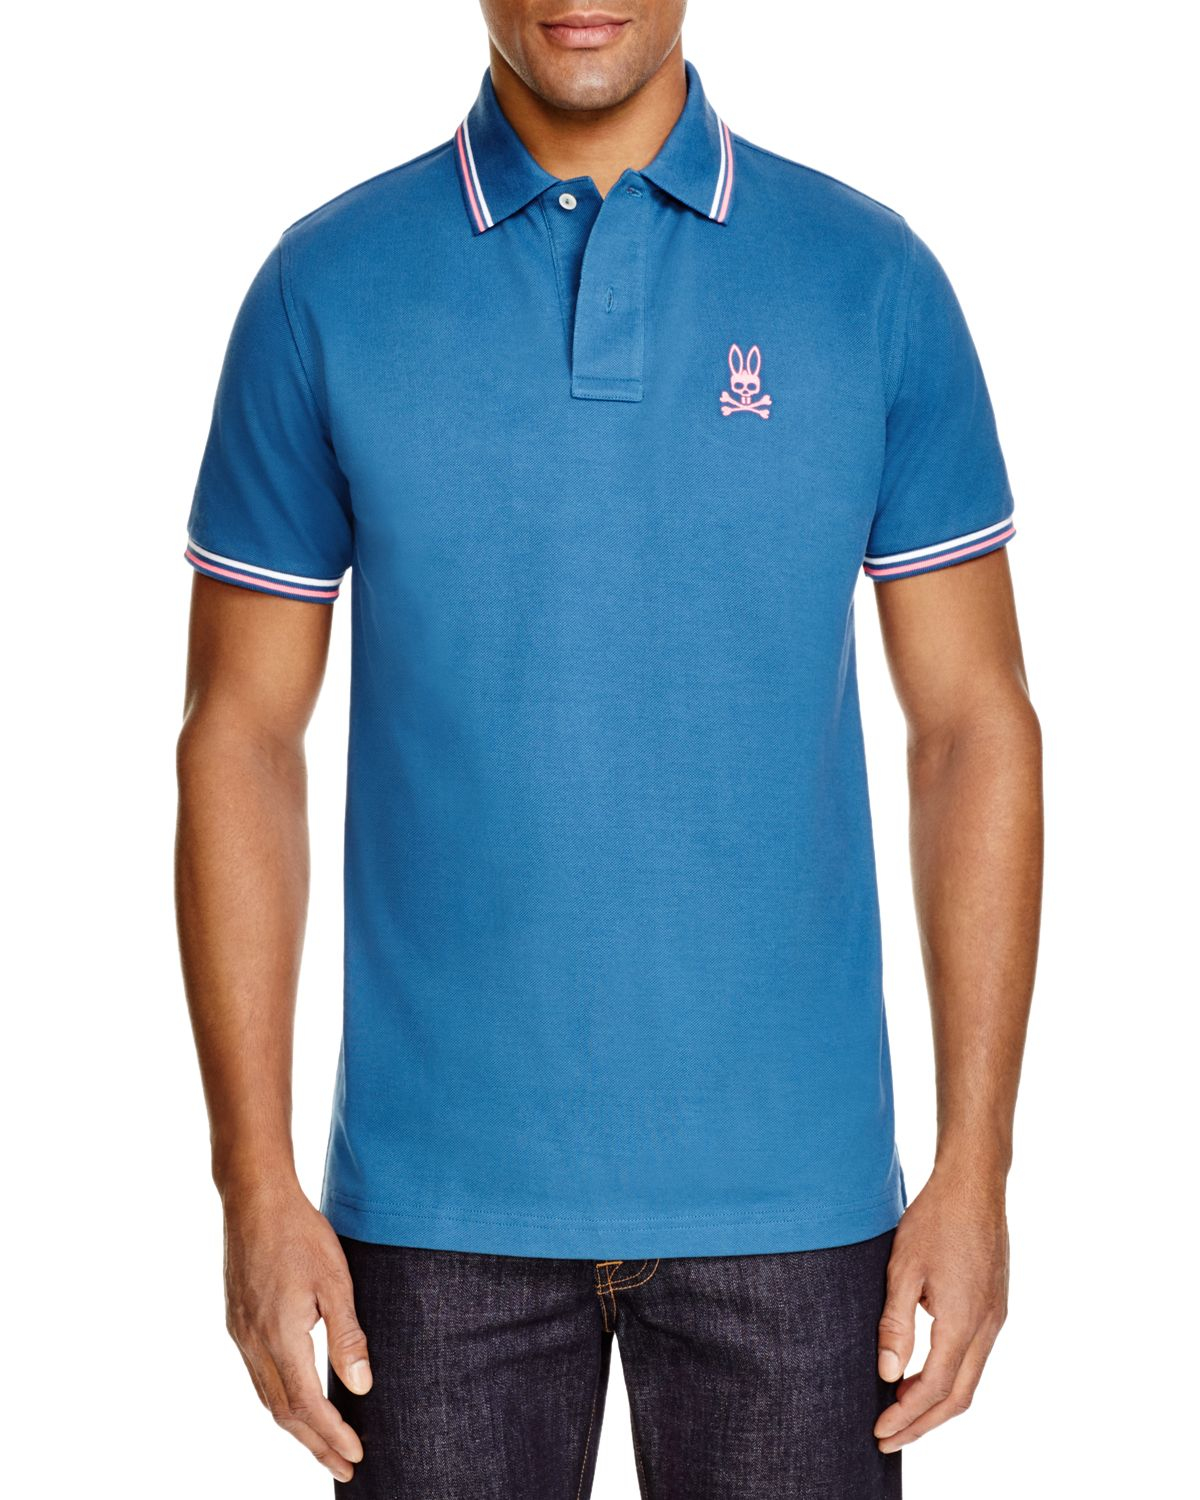 Lyst - Psycho Bunny Neon Bunny Polo - Regular Fit in Blue for Men